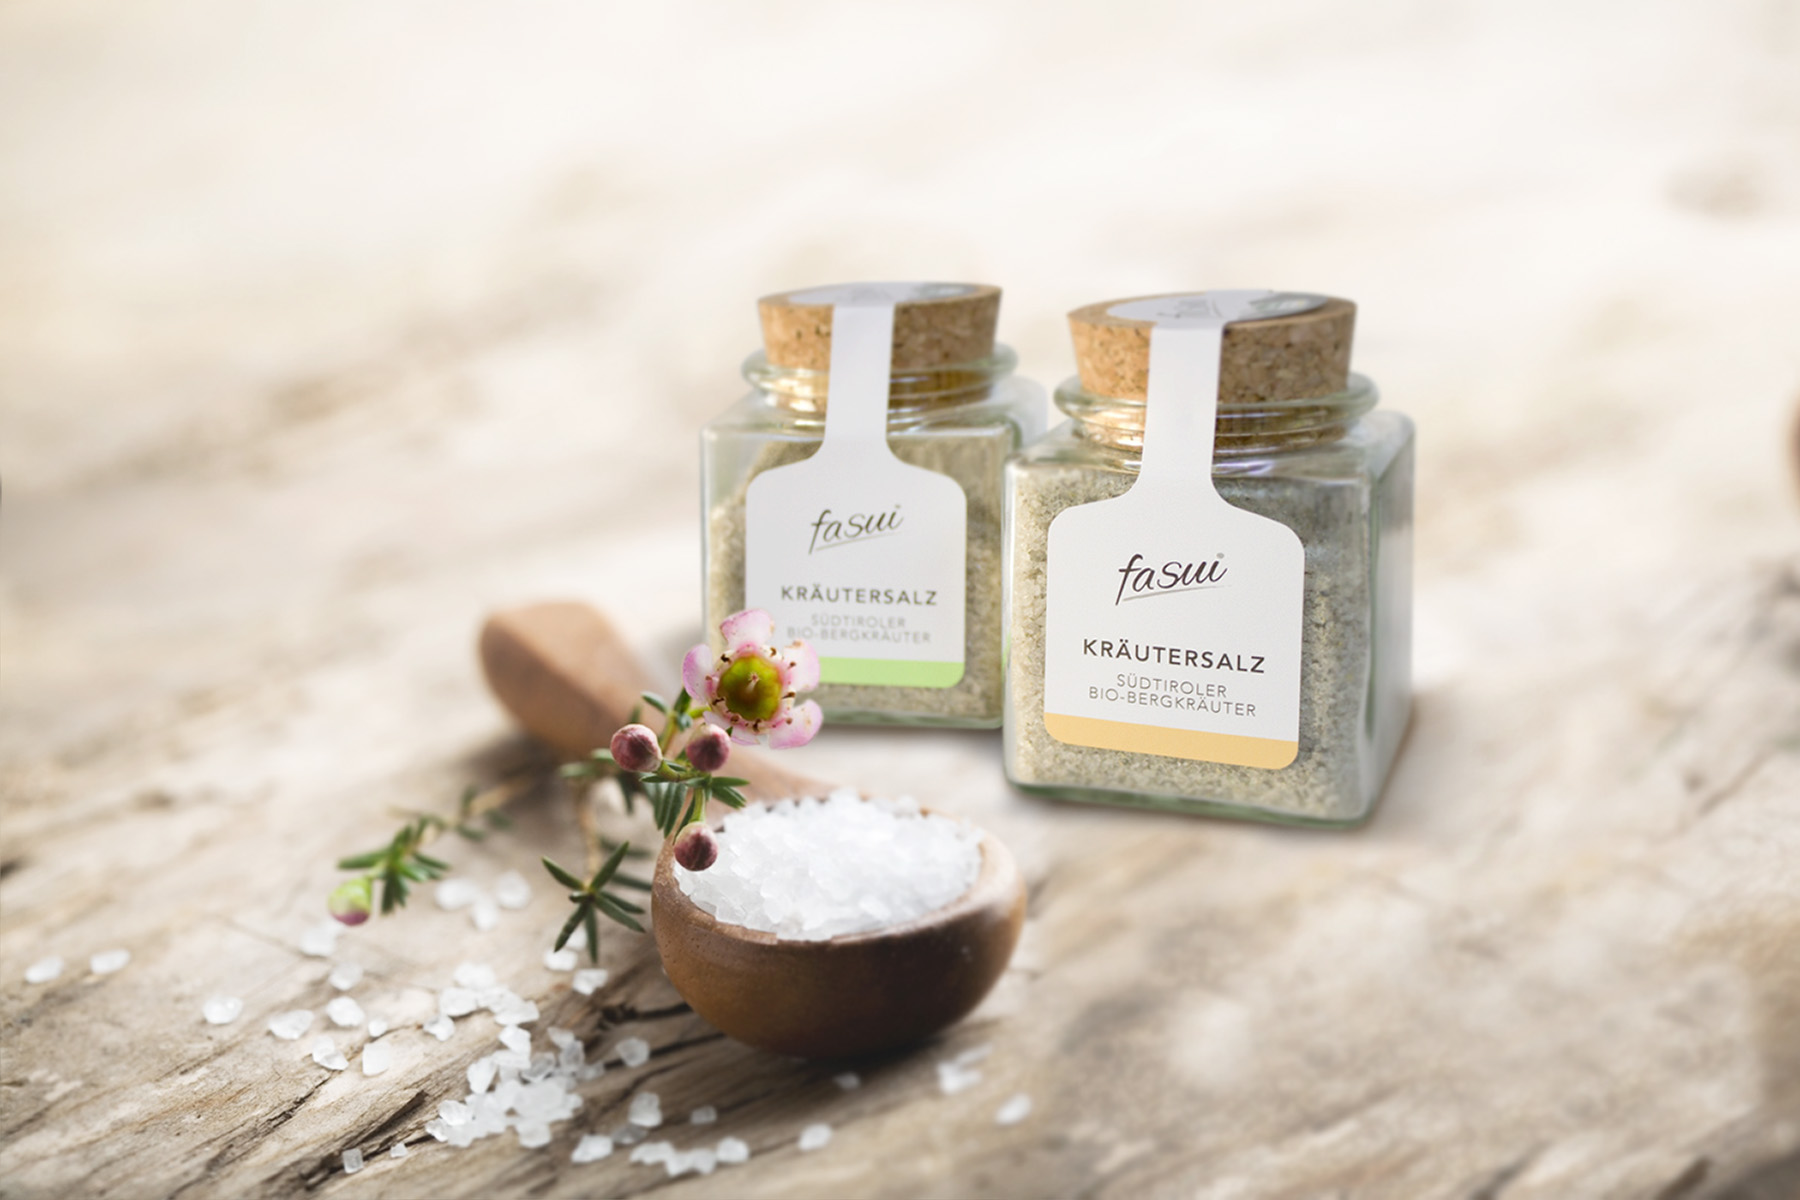 Salt – Sea salt from Sicily and organic mountain herbs from South Tyrol